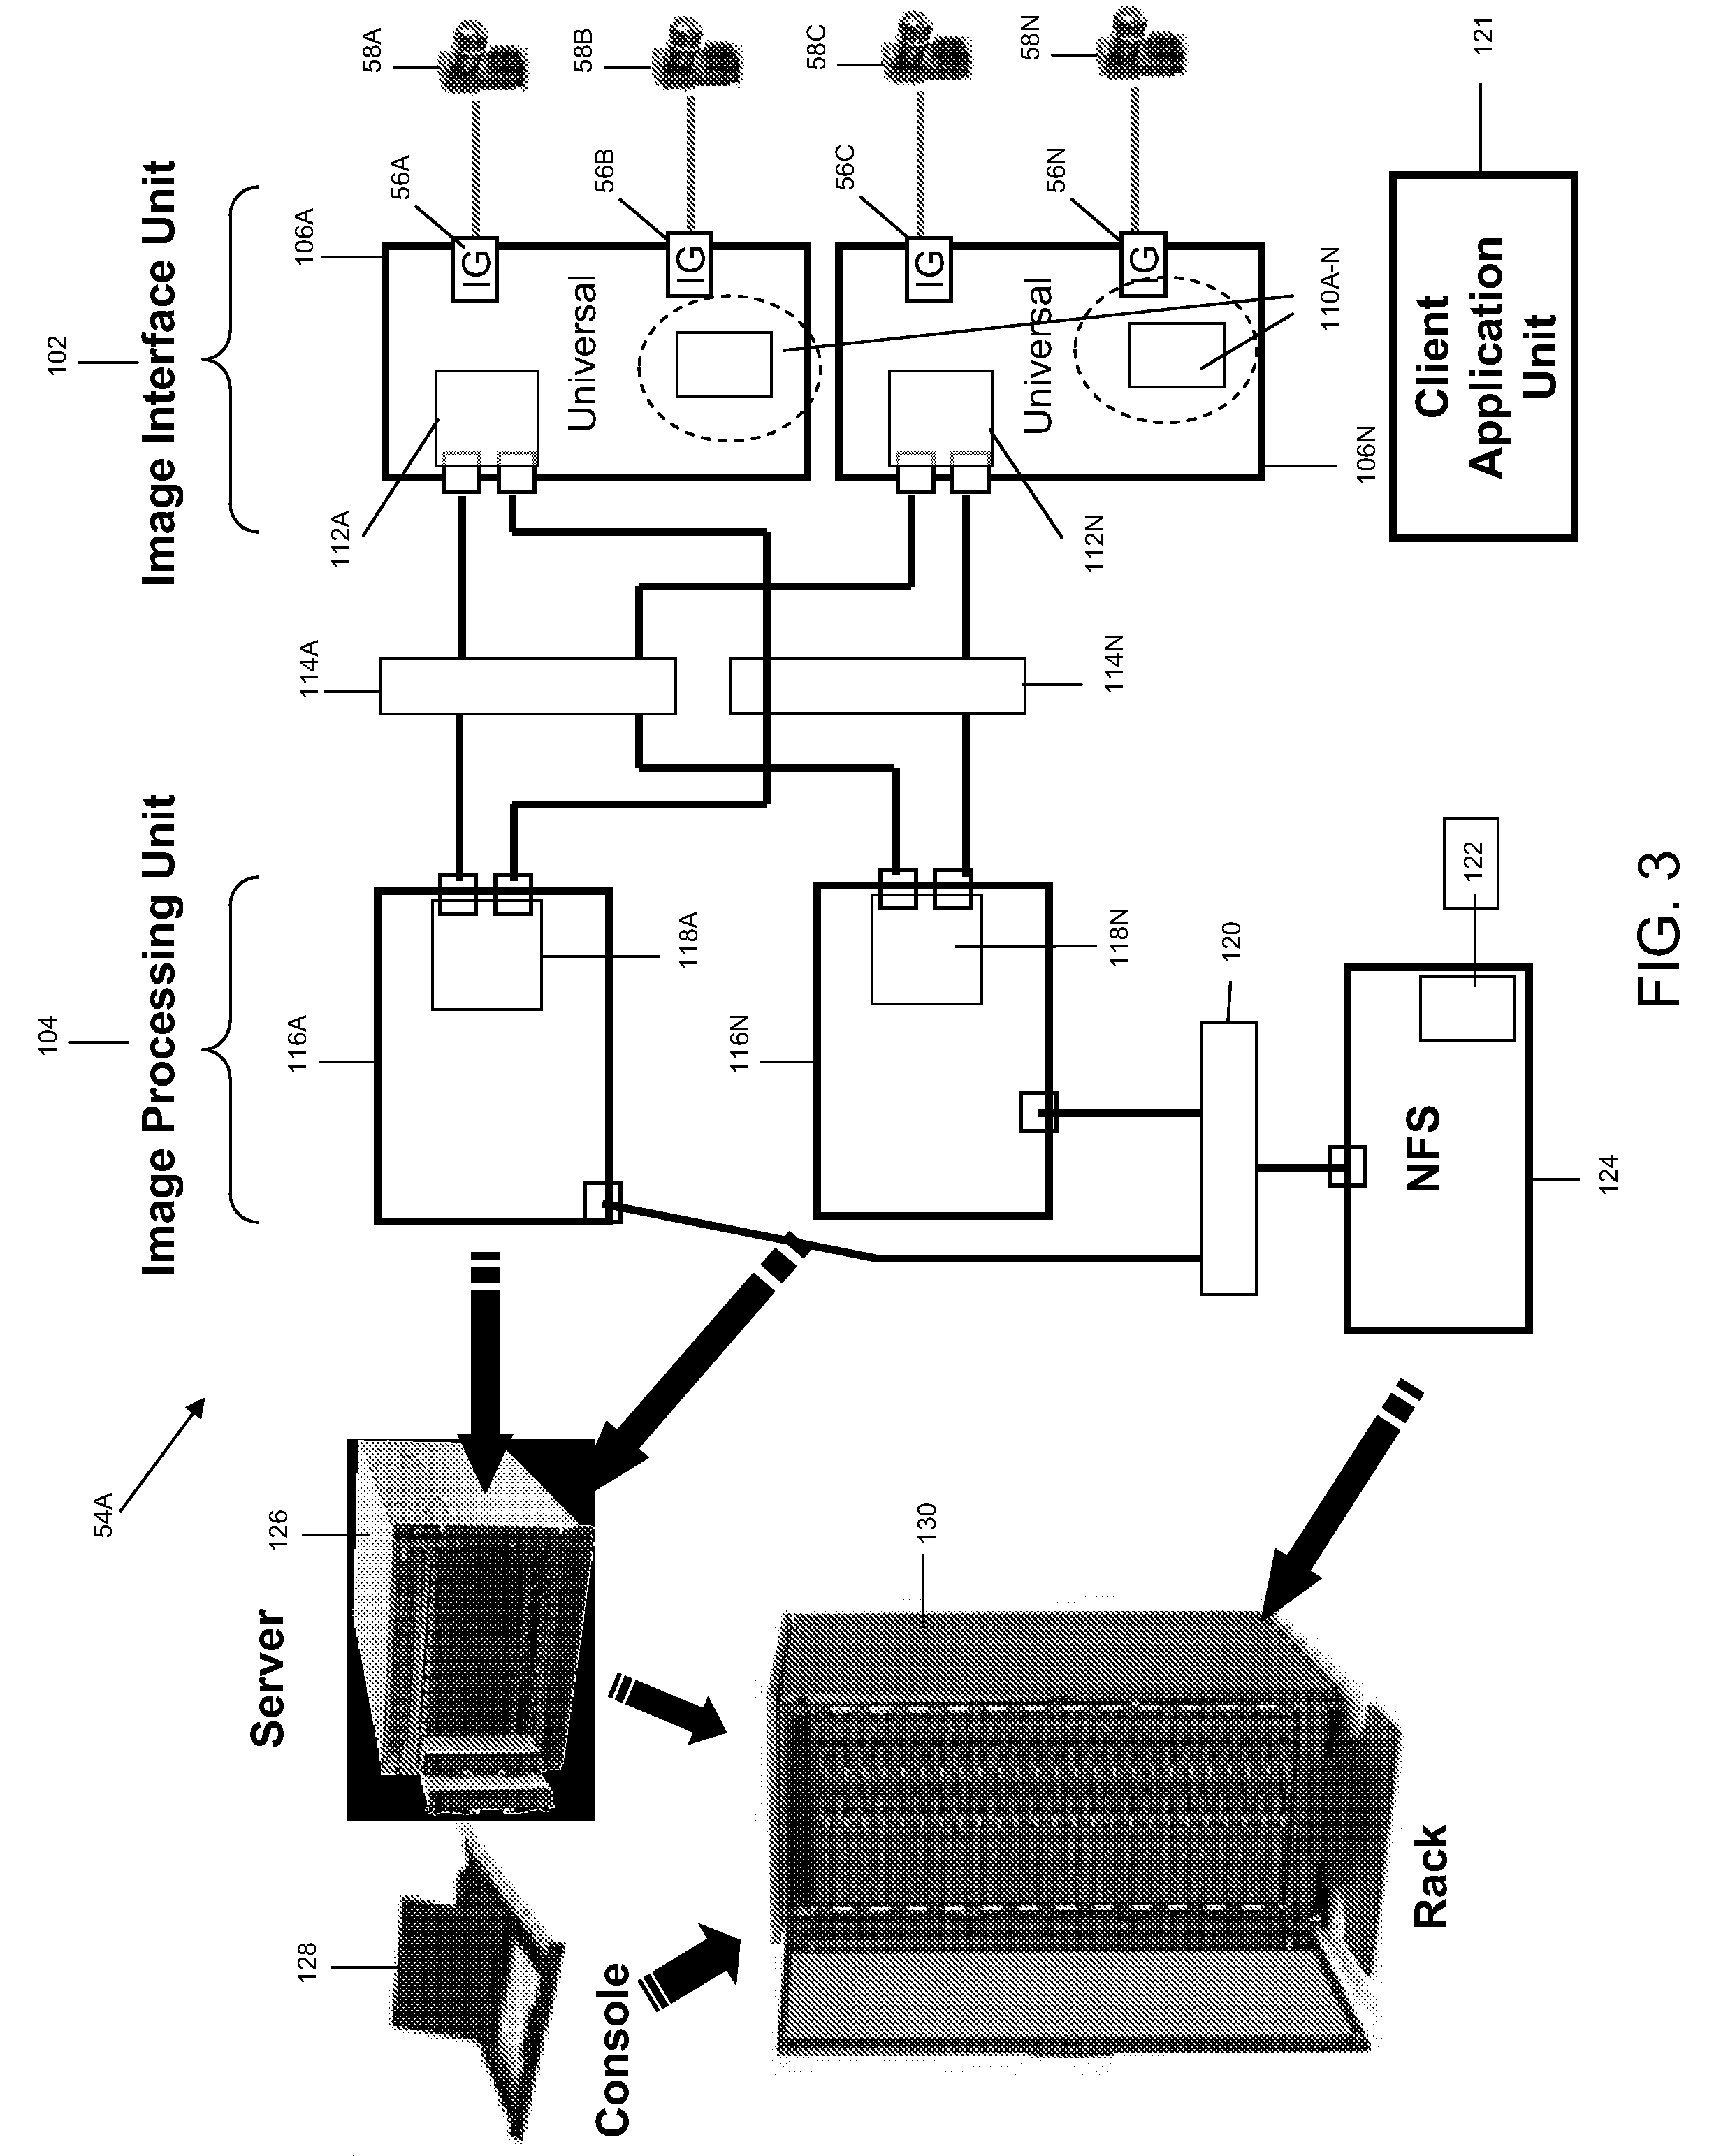 Pre-processing optimization of an image processing system